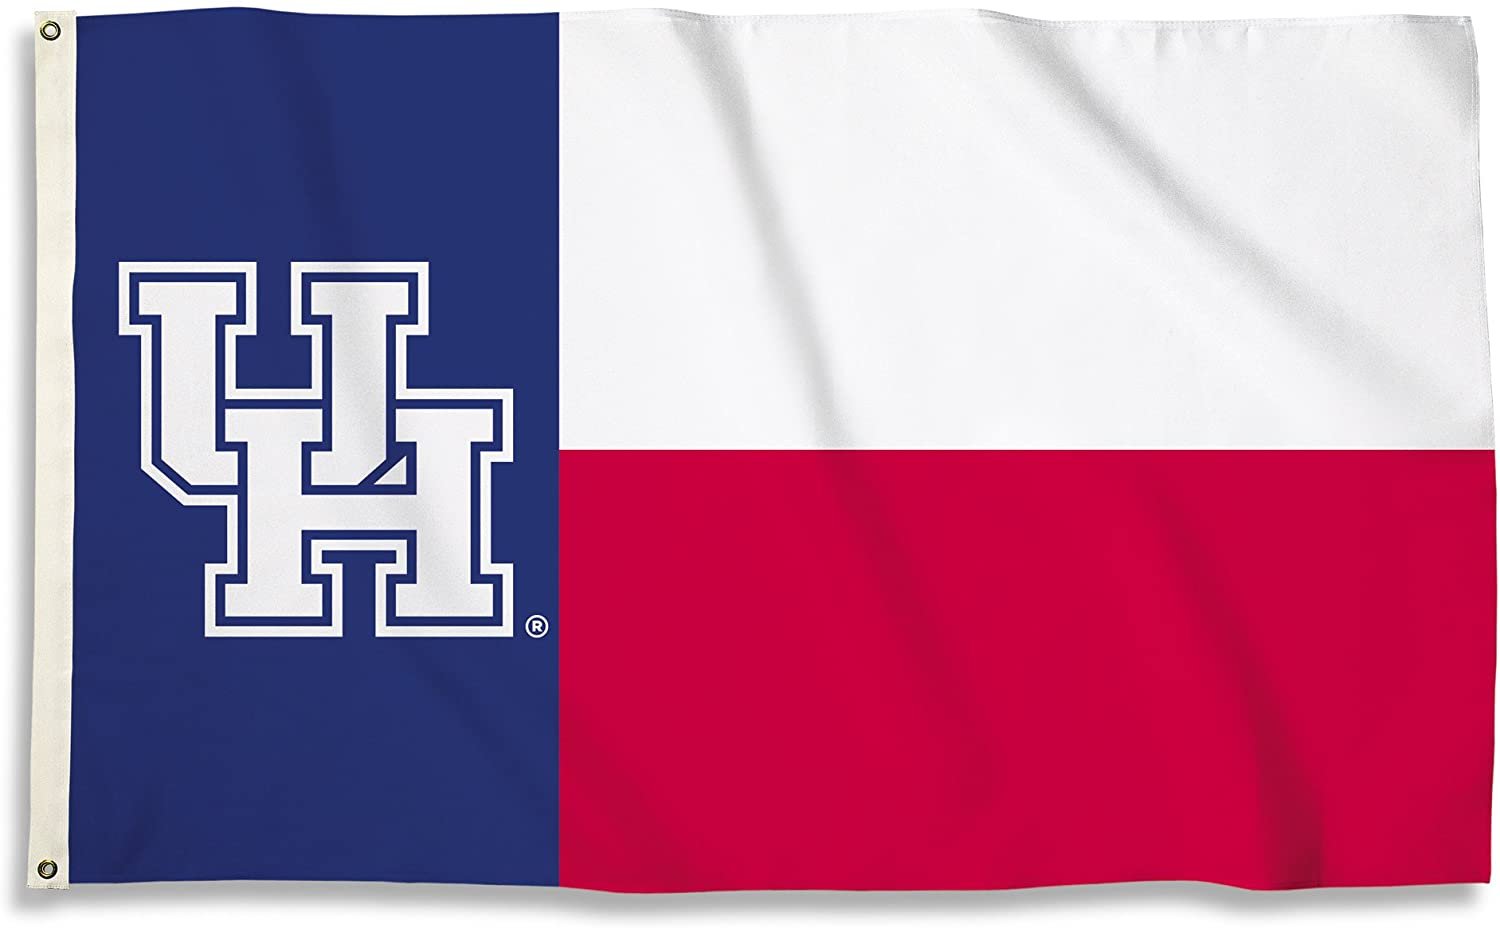 University of Houston Cougars Premium 3x5 Feet Flag Banner, Texas State Flag Design, Metal Grommets, Outdoor Use, Single Sided